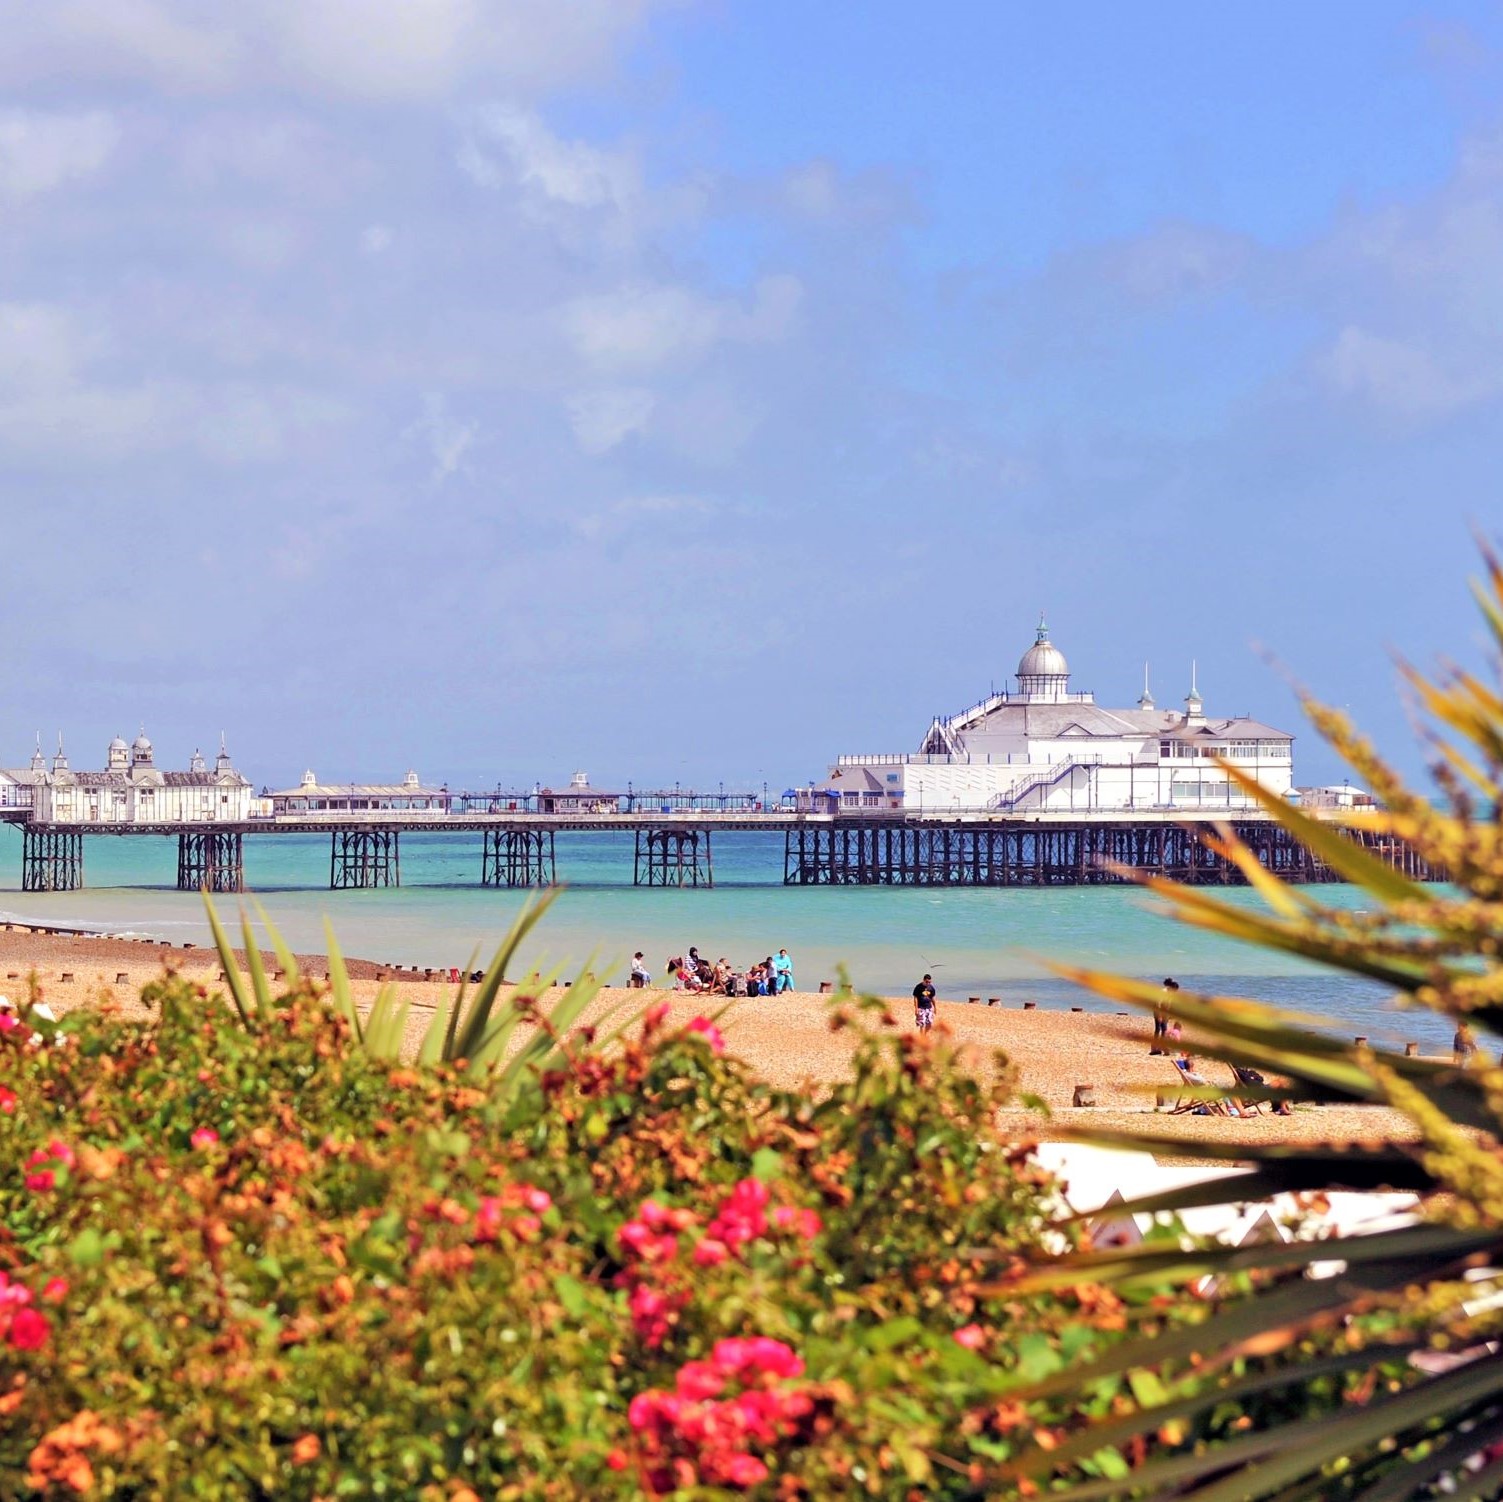 Places to stay in Eastbourne -Self catering holiday rental accommodation